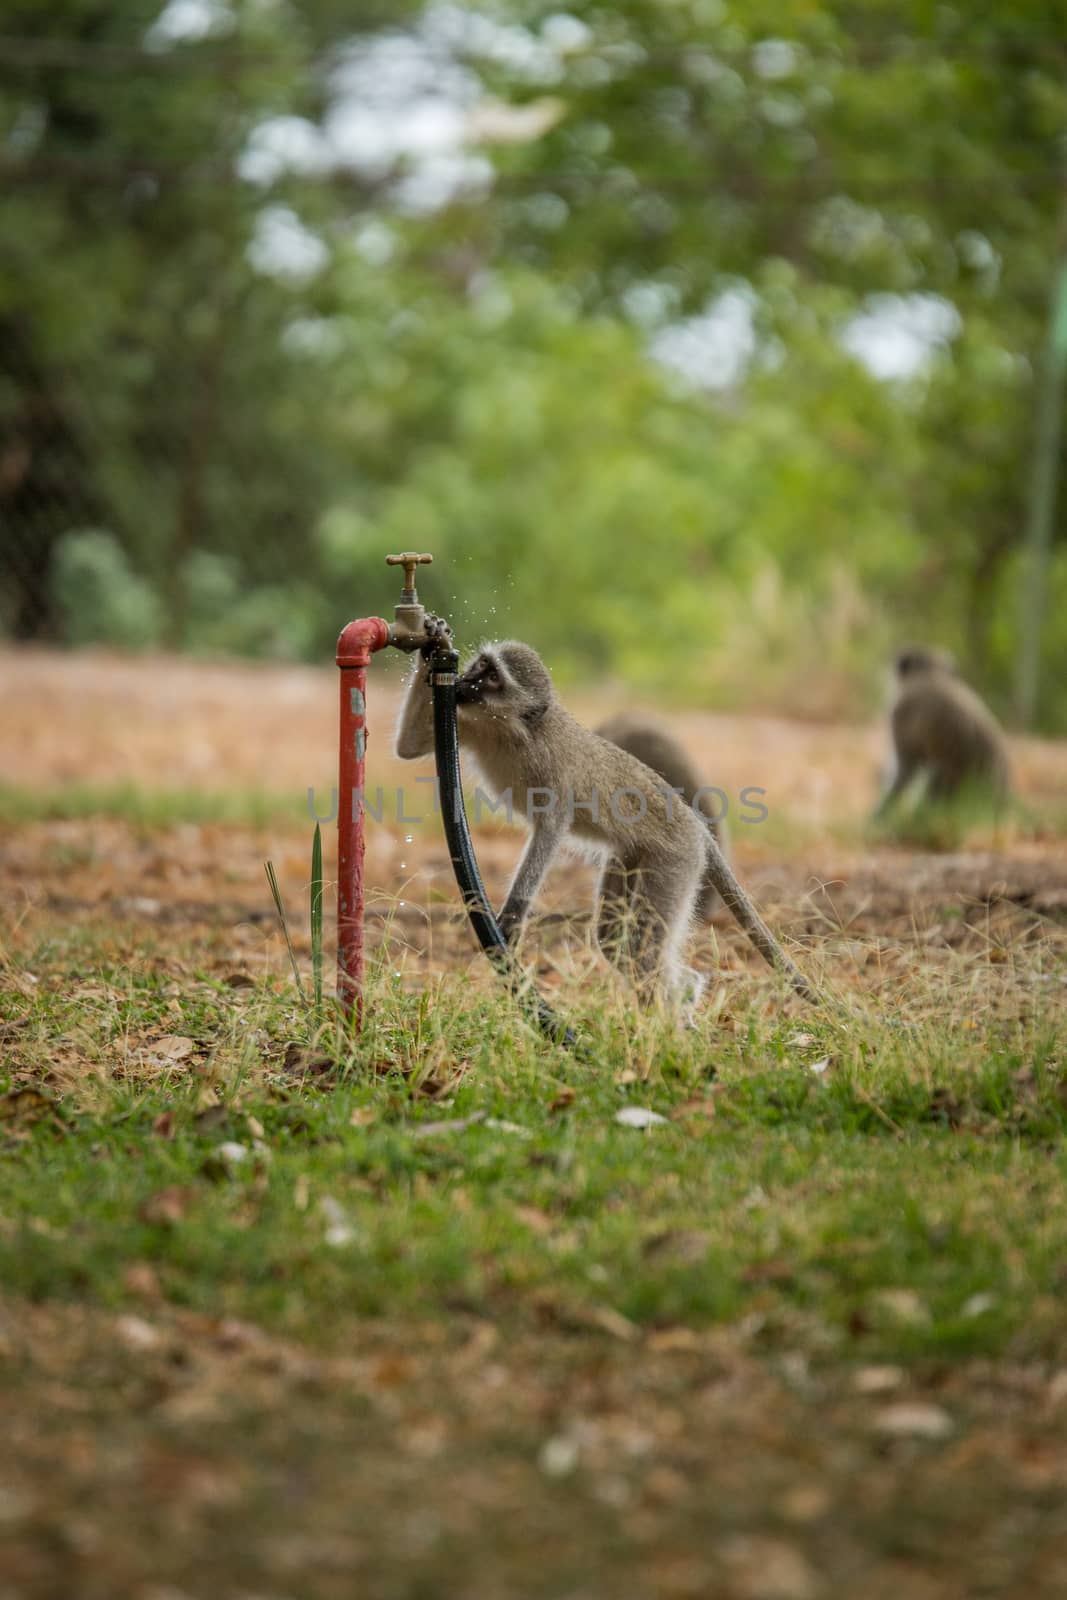 Vervet monkey in the Kruger National Park, South Africa. by Simoneemanphotography